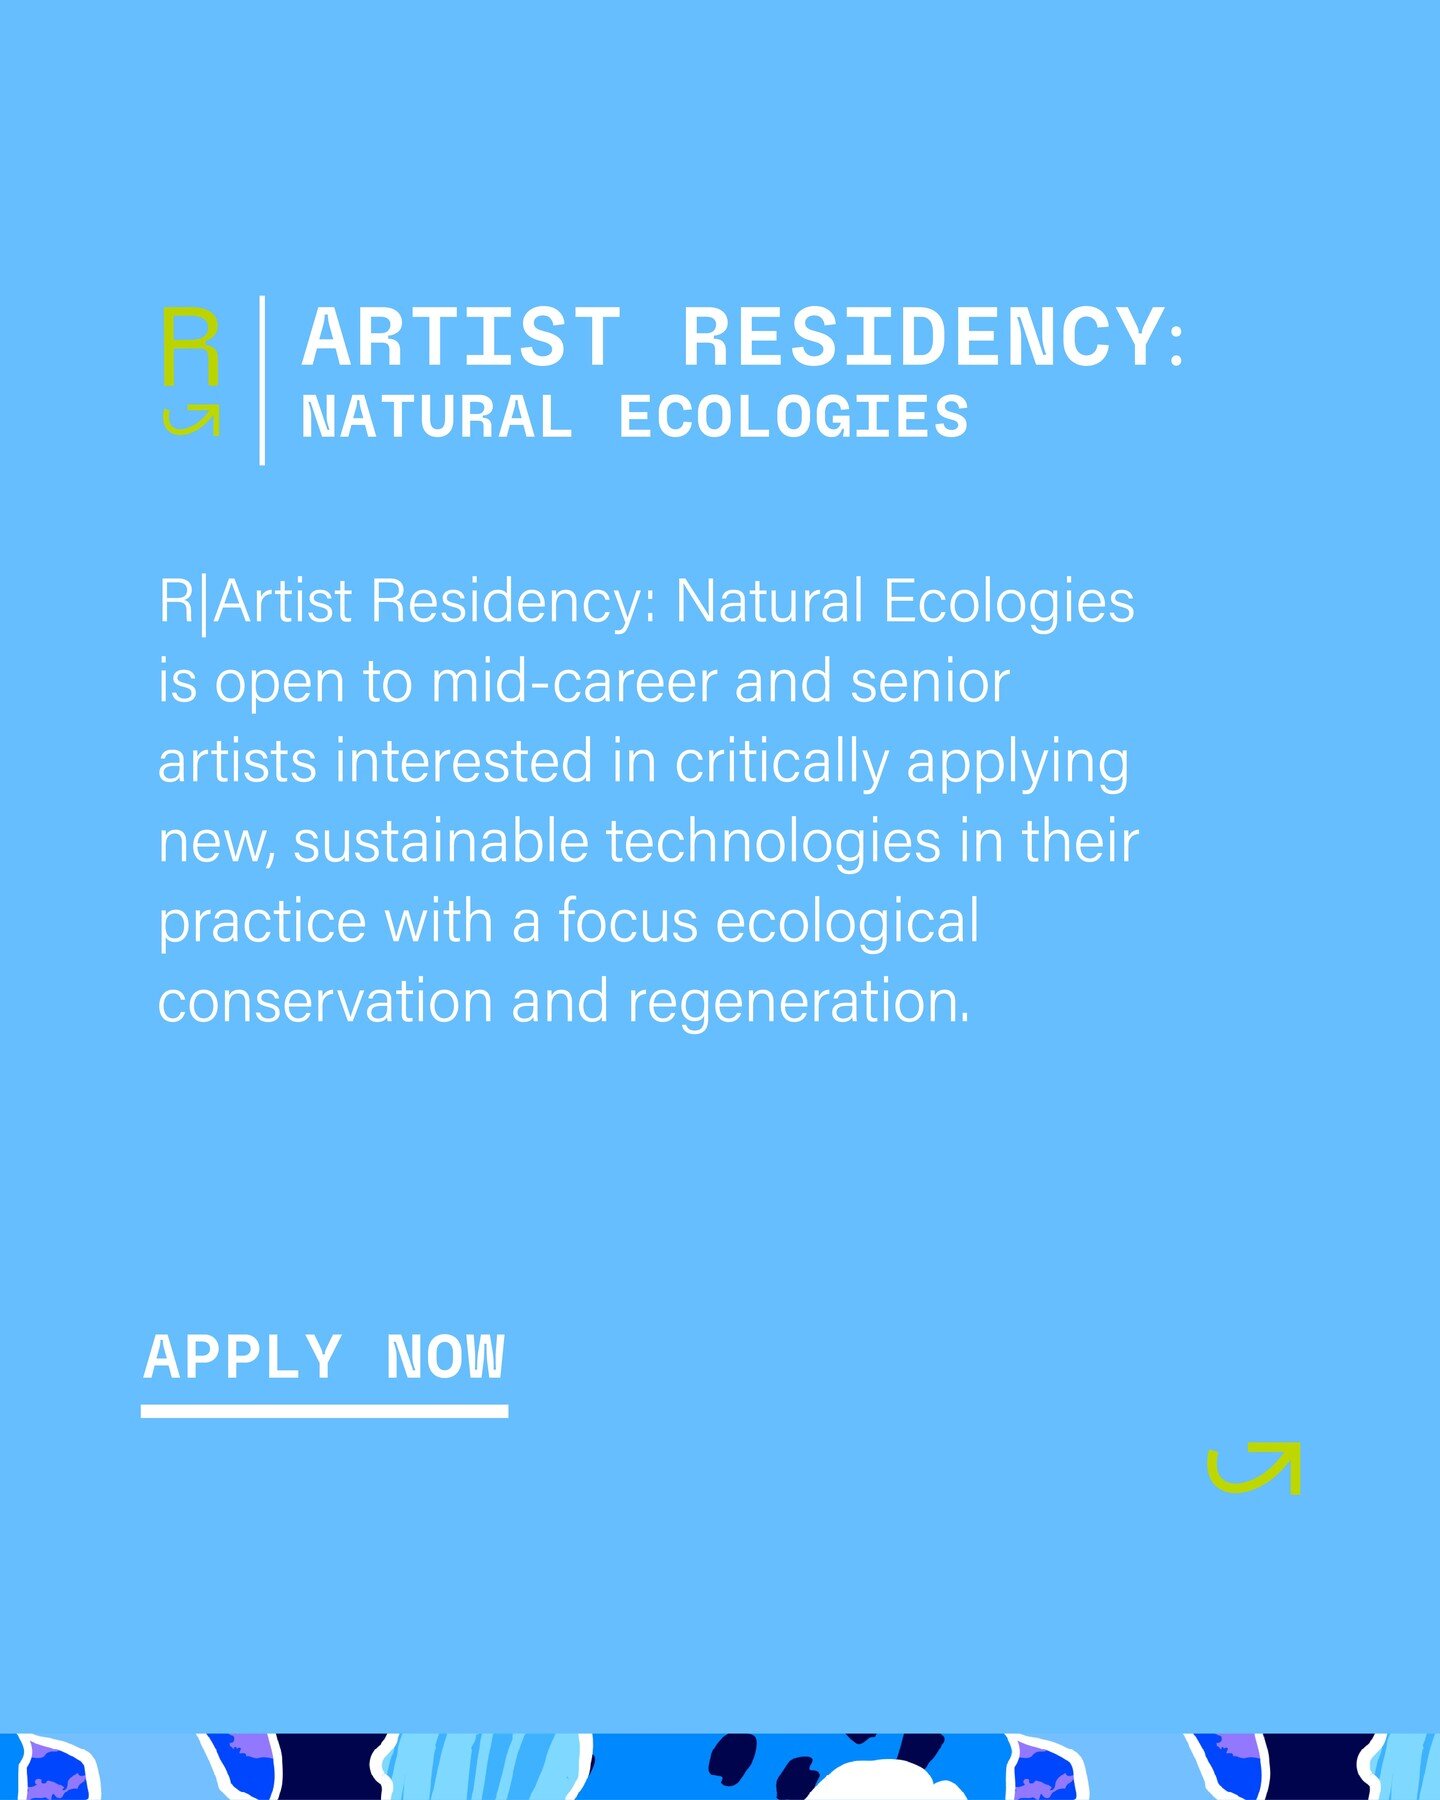 R| Artist Residency: Natural Ecologies now open for application!

Applications are now open for mid-career and senior artists interested in critically applying new, sustainable technologies in their practice with a focus on ecological conservation an